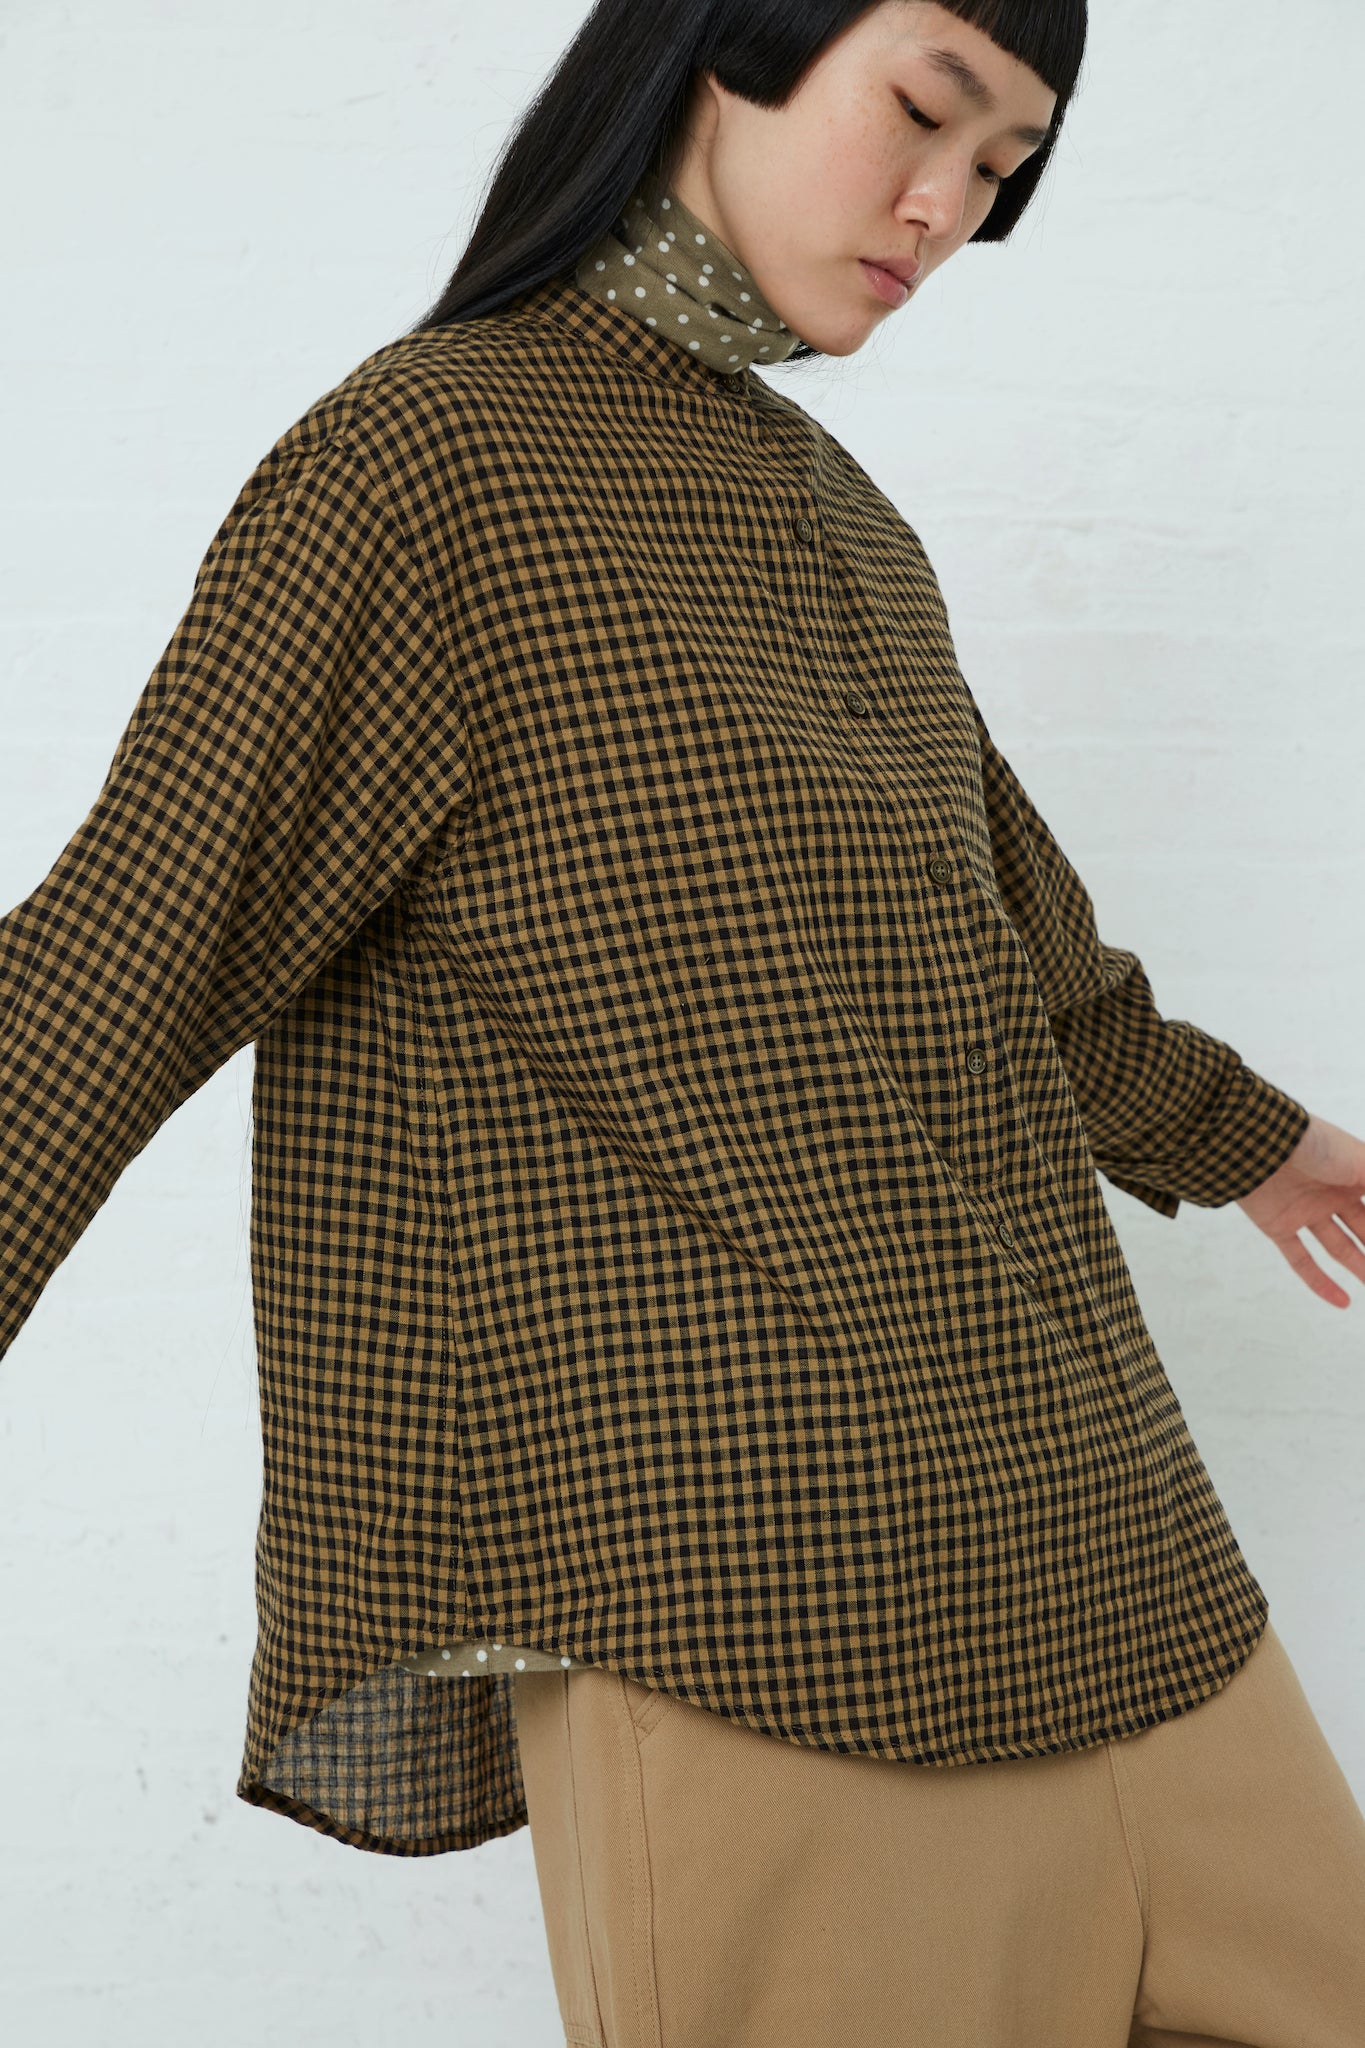 The model is wearing a relaxed fit Cotton/Linen Gingham Shirt in Beige by Ichi. Side view.